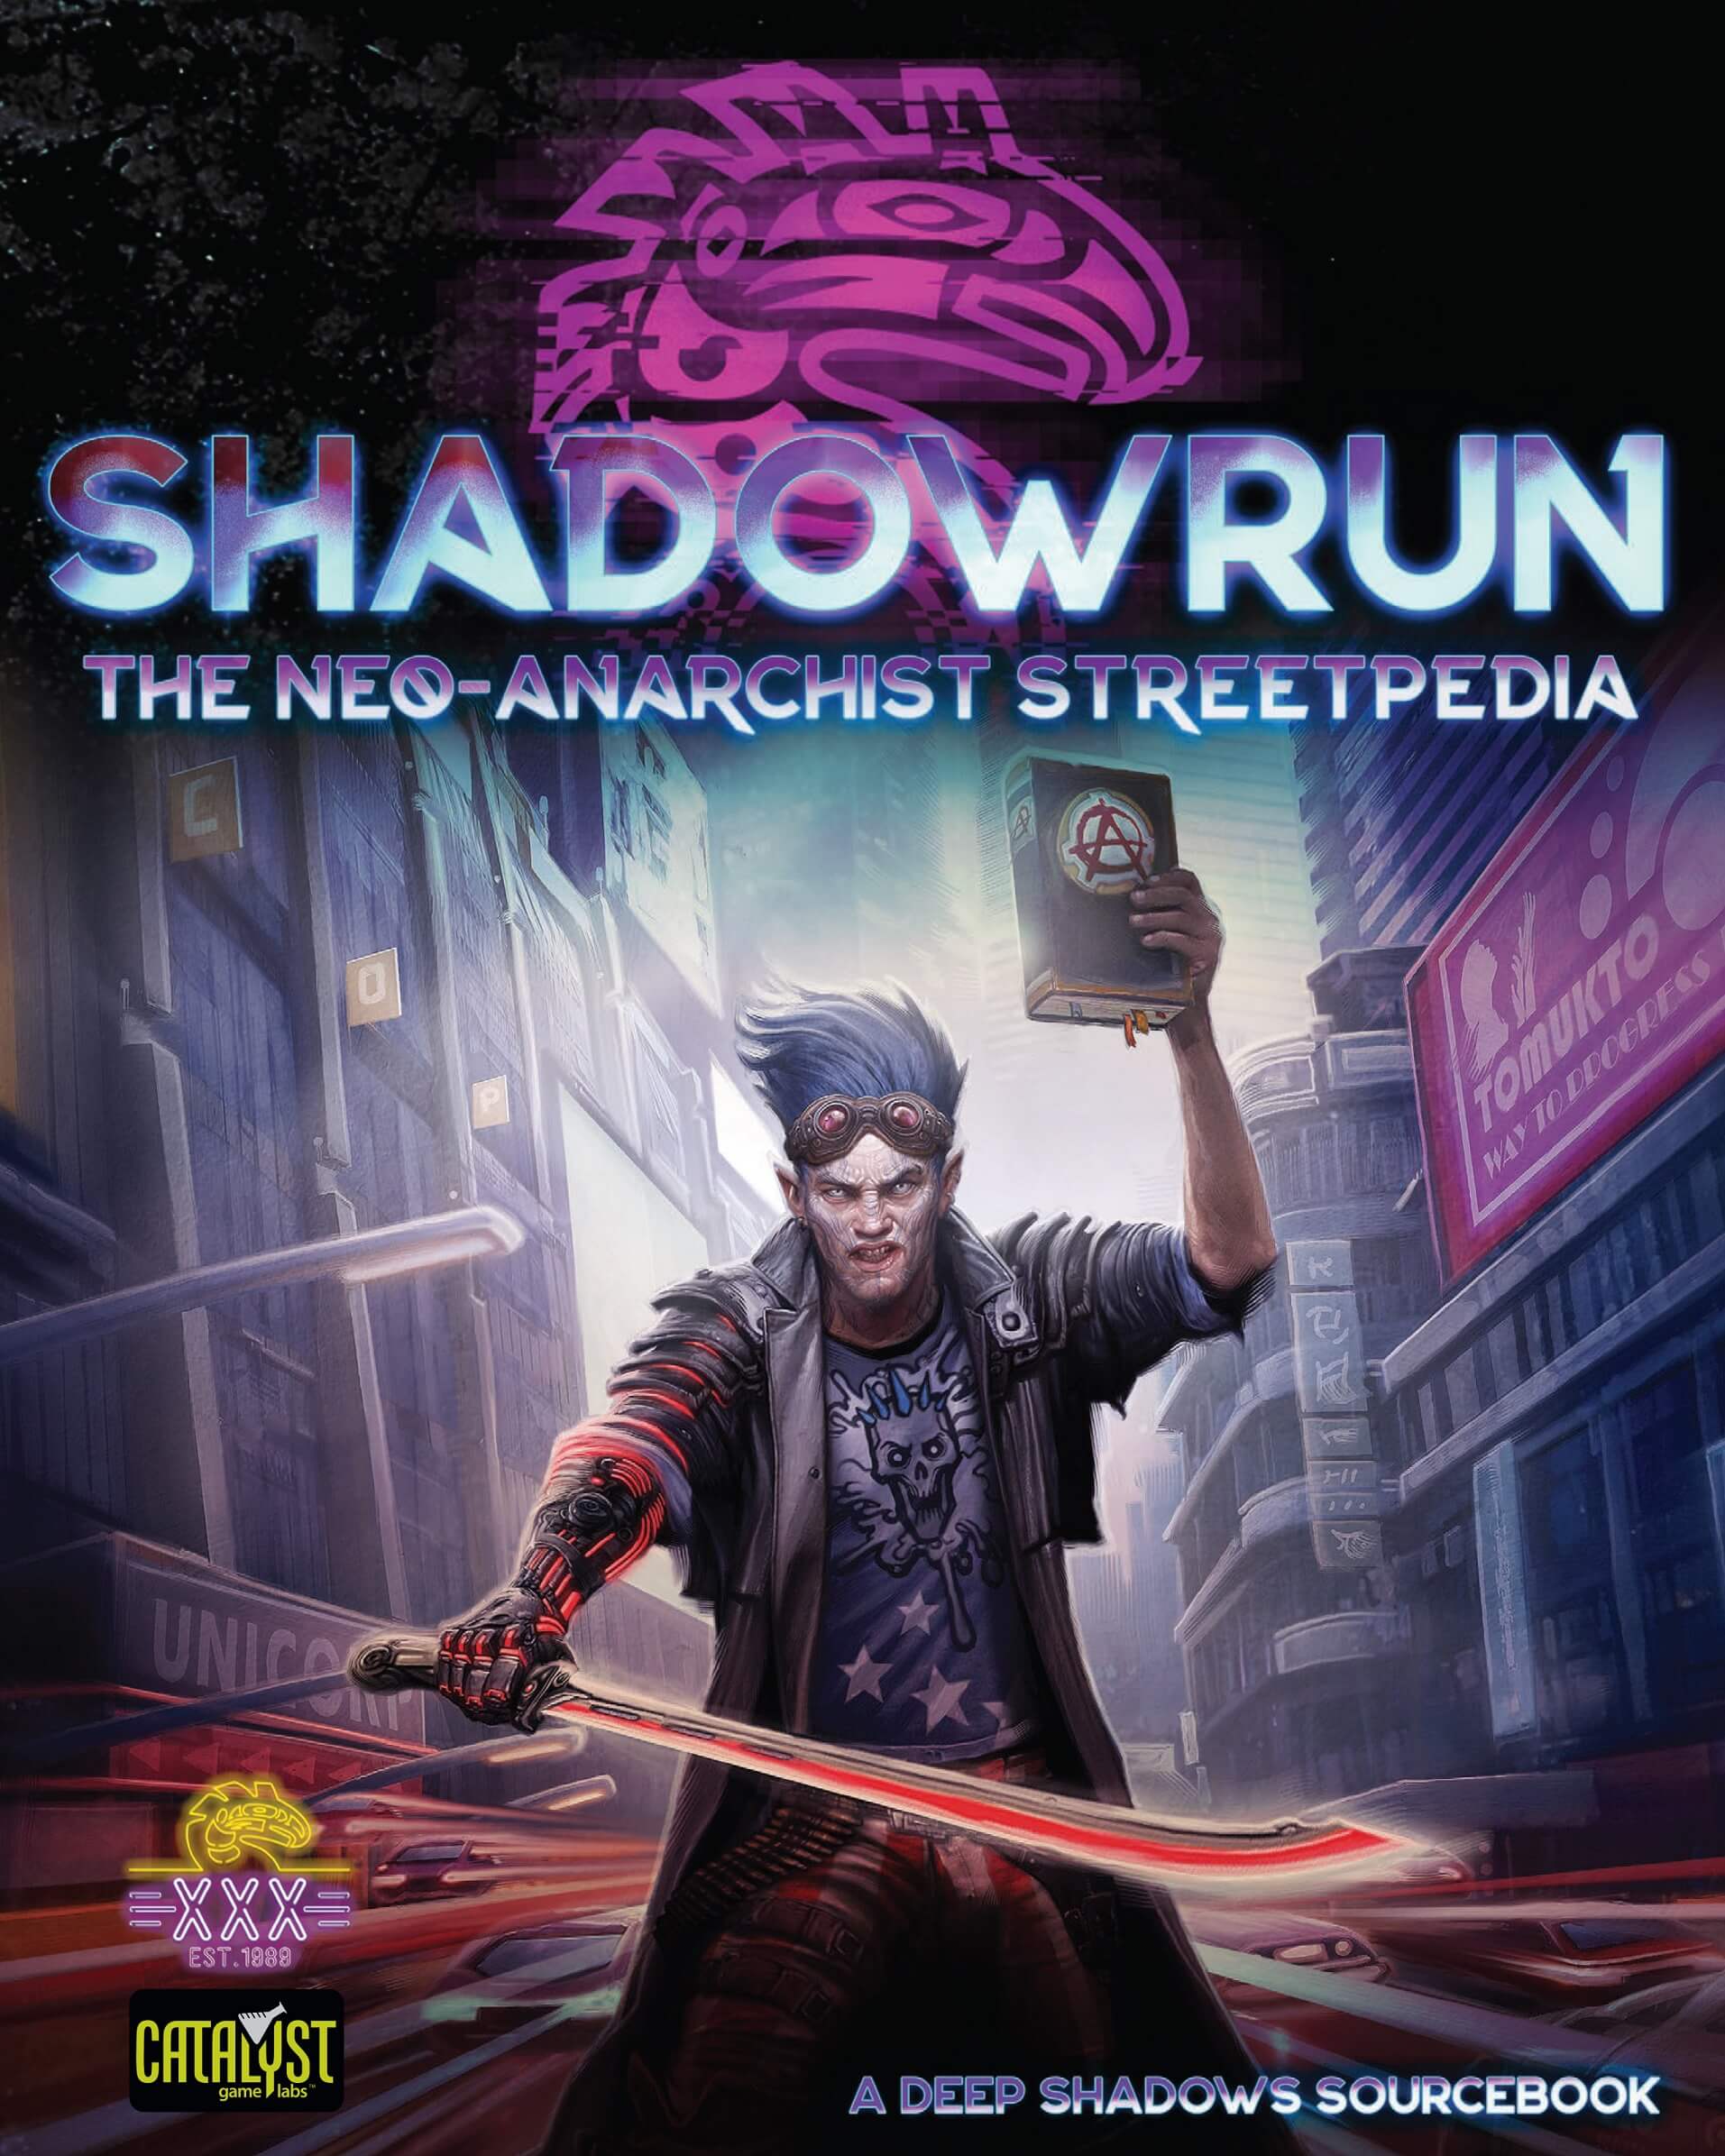 6 Beginner Tips And Tricks For The Shadowrun Trilogy